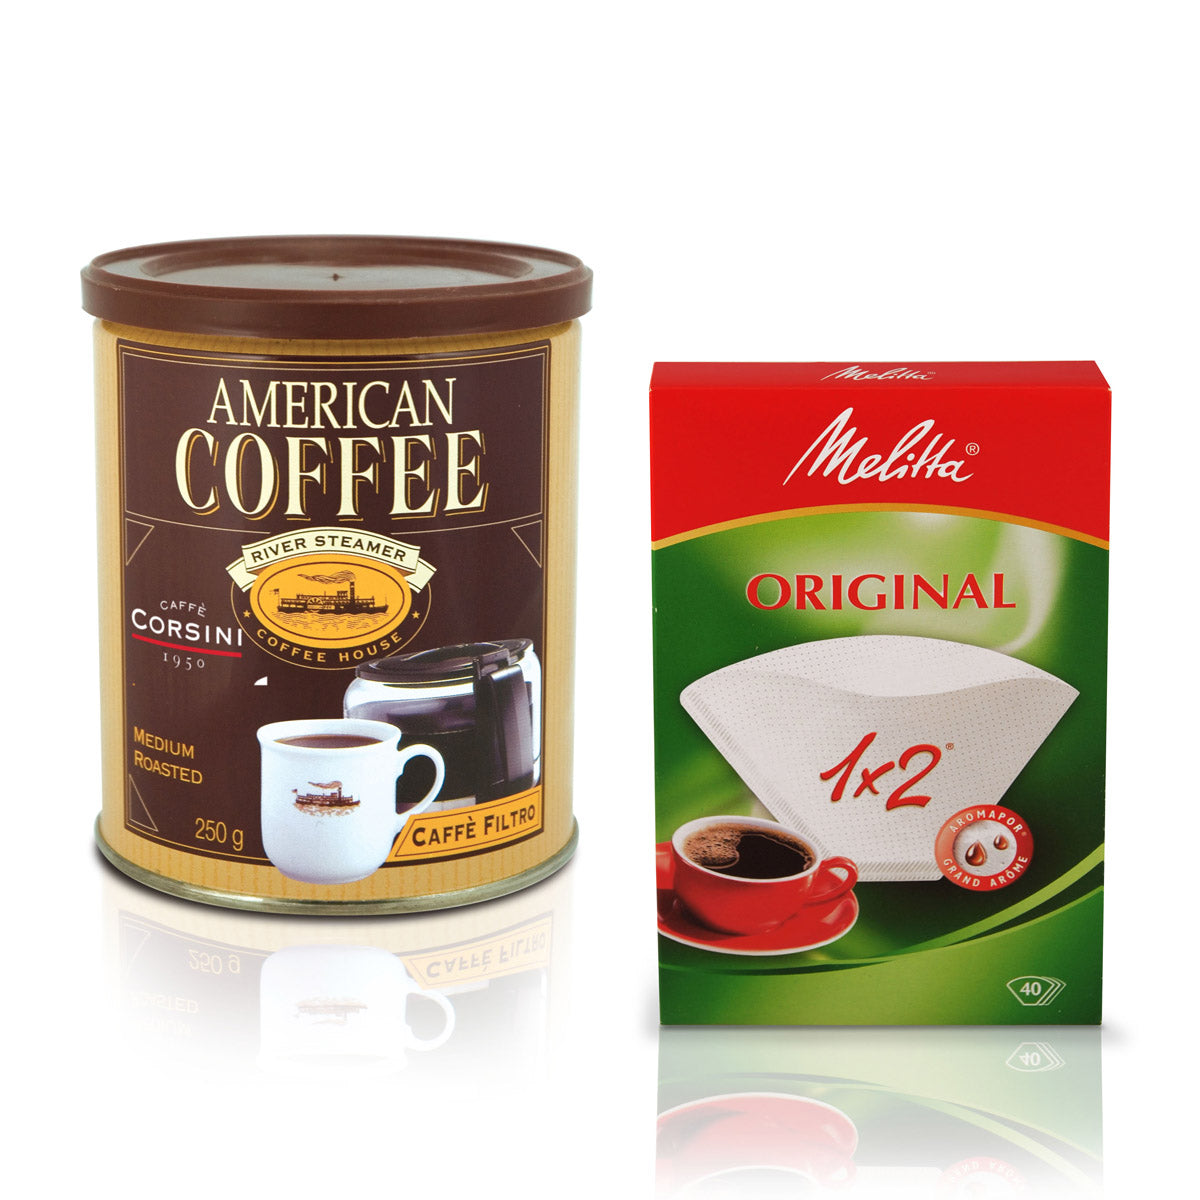 250g tin of American Coffe and 40 paper filter pack Melitta 1x2 cups